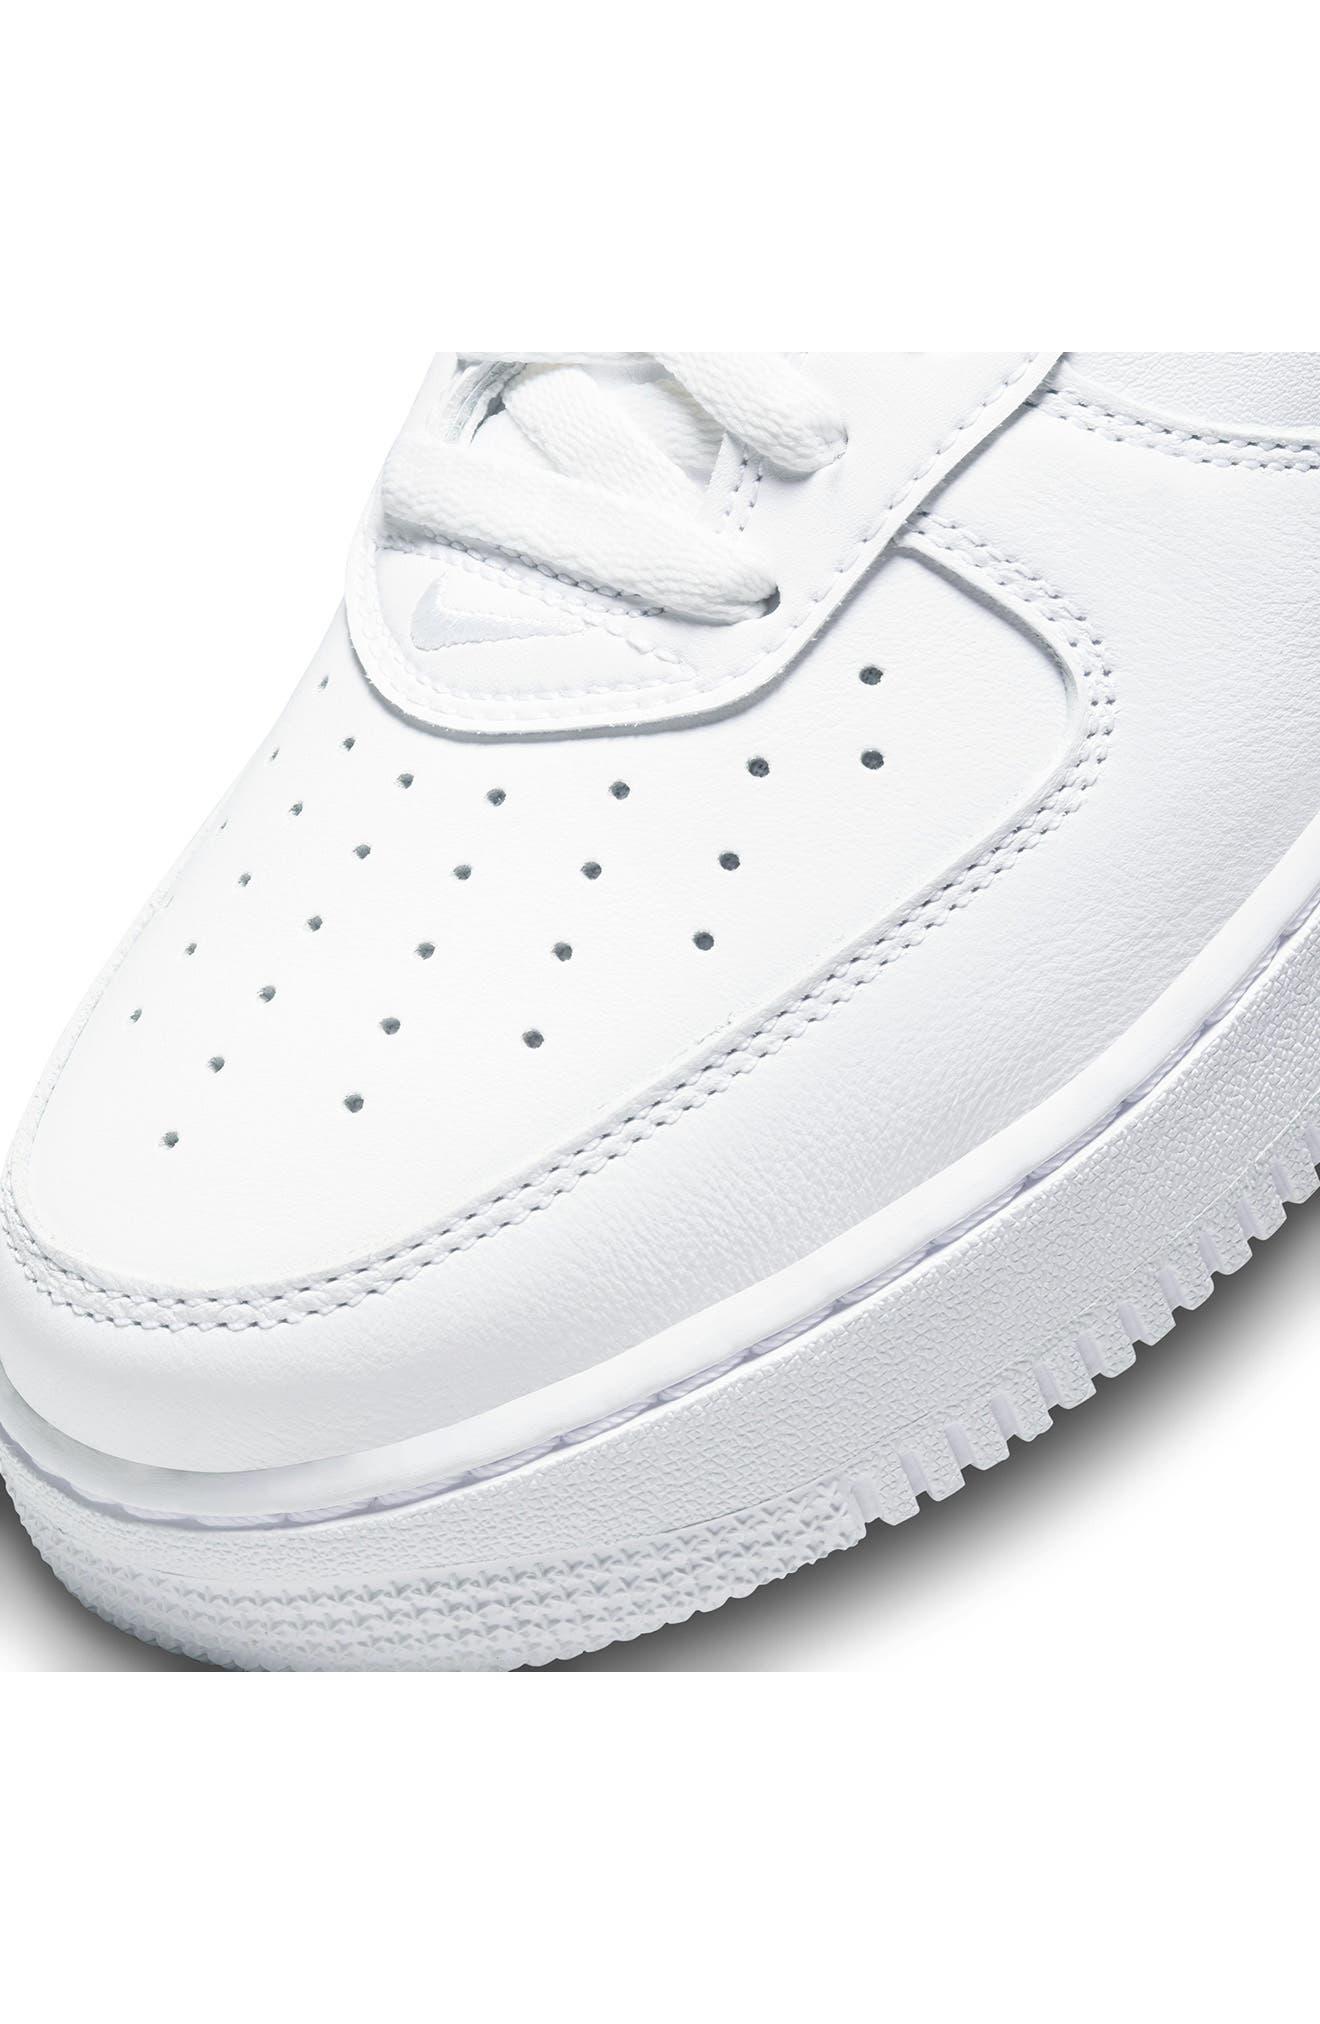 Nike Air Force 1 Low Retro Qs Sneaker in White | Lyst